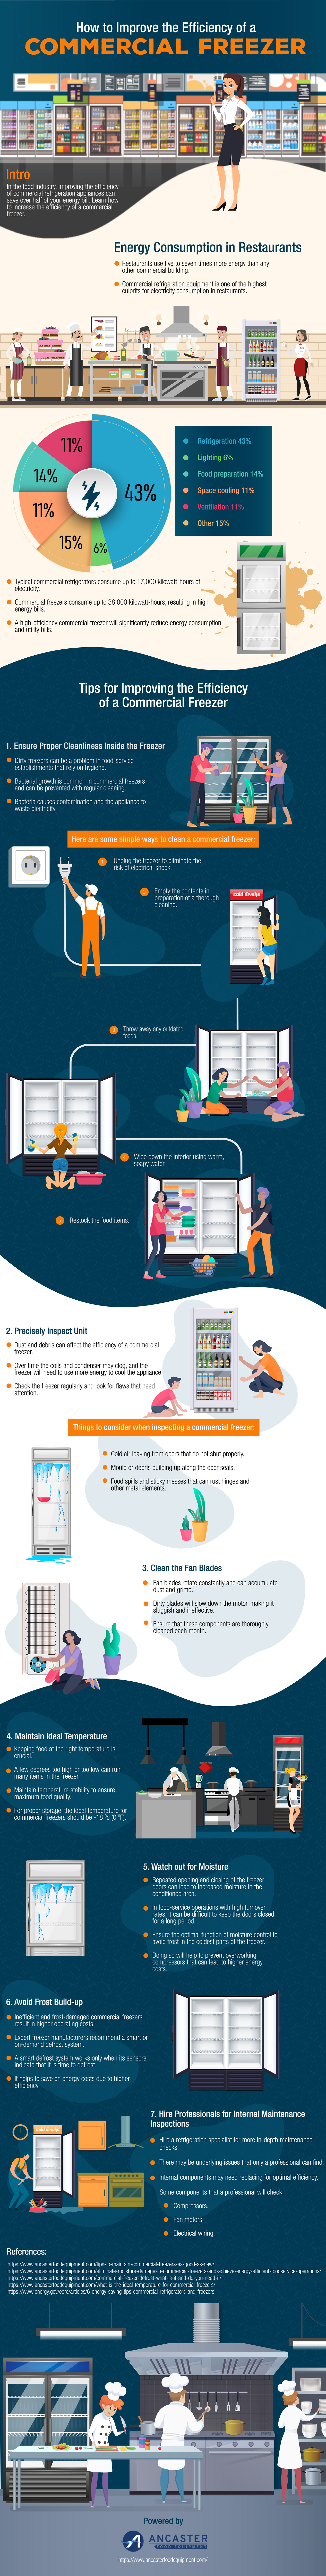 commercial freezer infographic